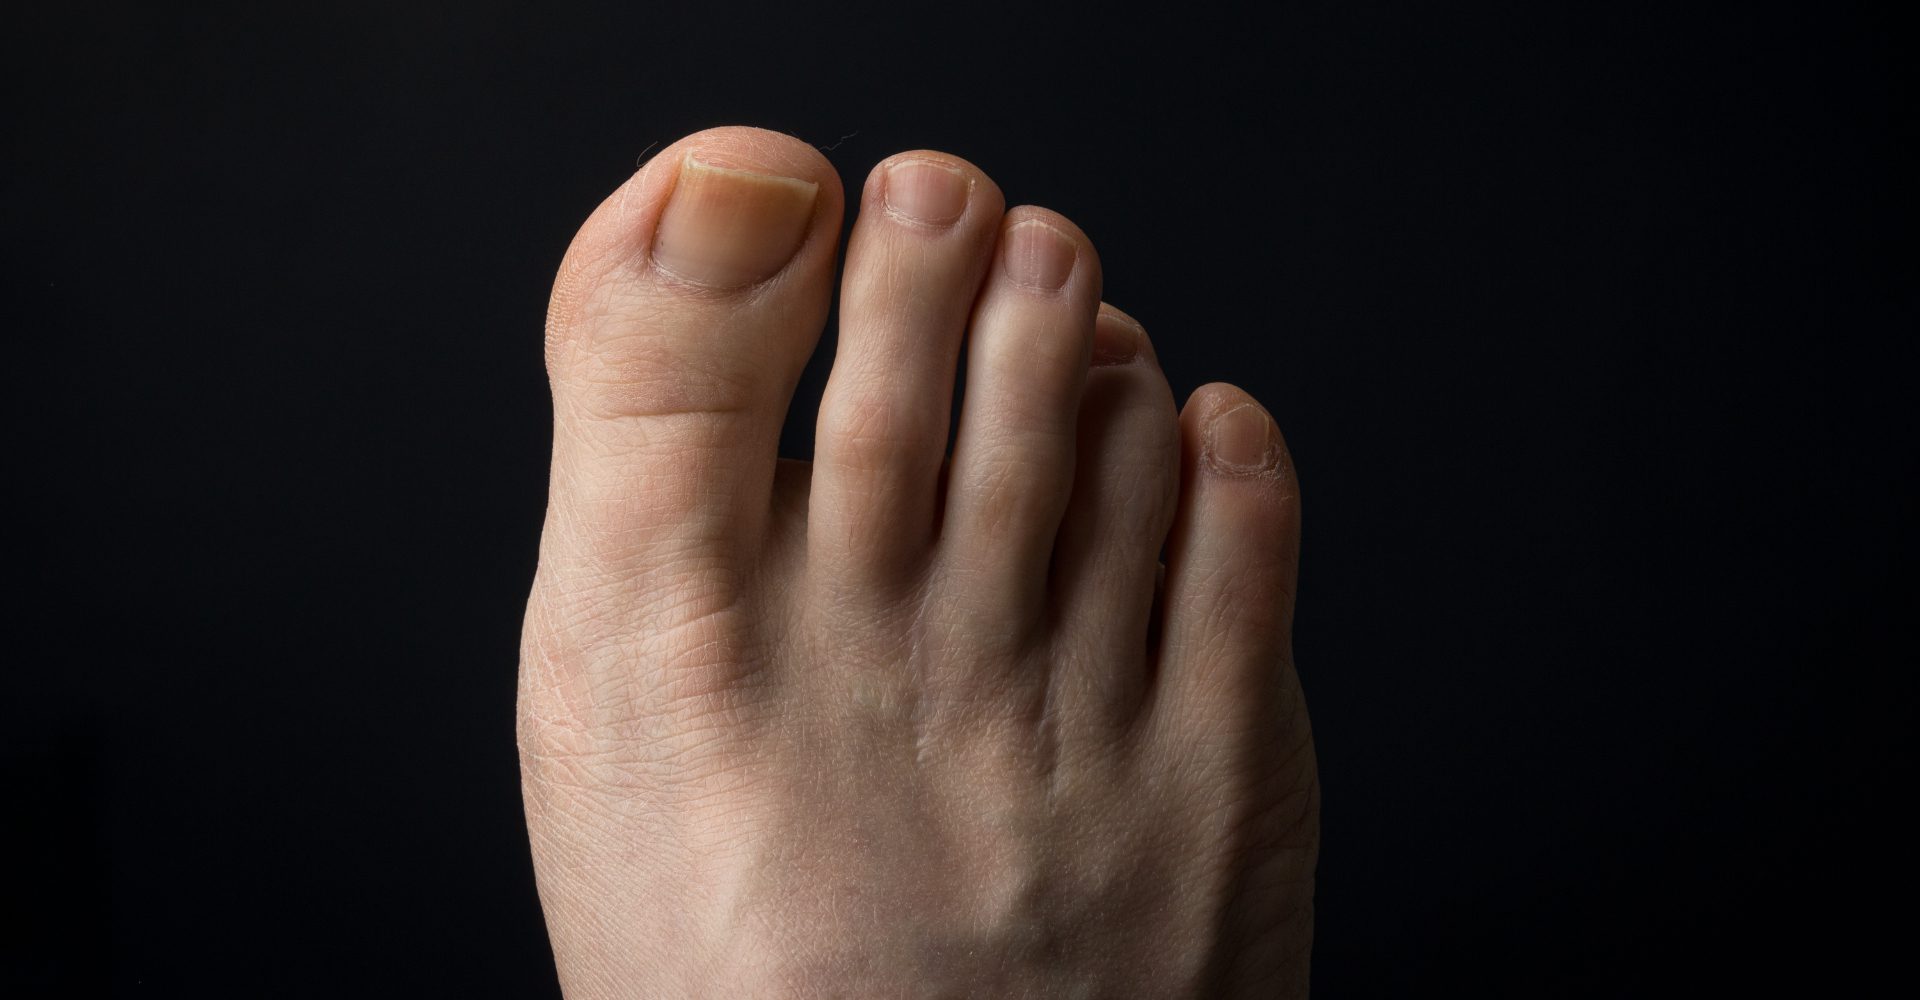 A close-up image of a foot with morton's neuroma, a painful condition affecting the nerve between the toes.